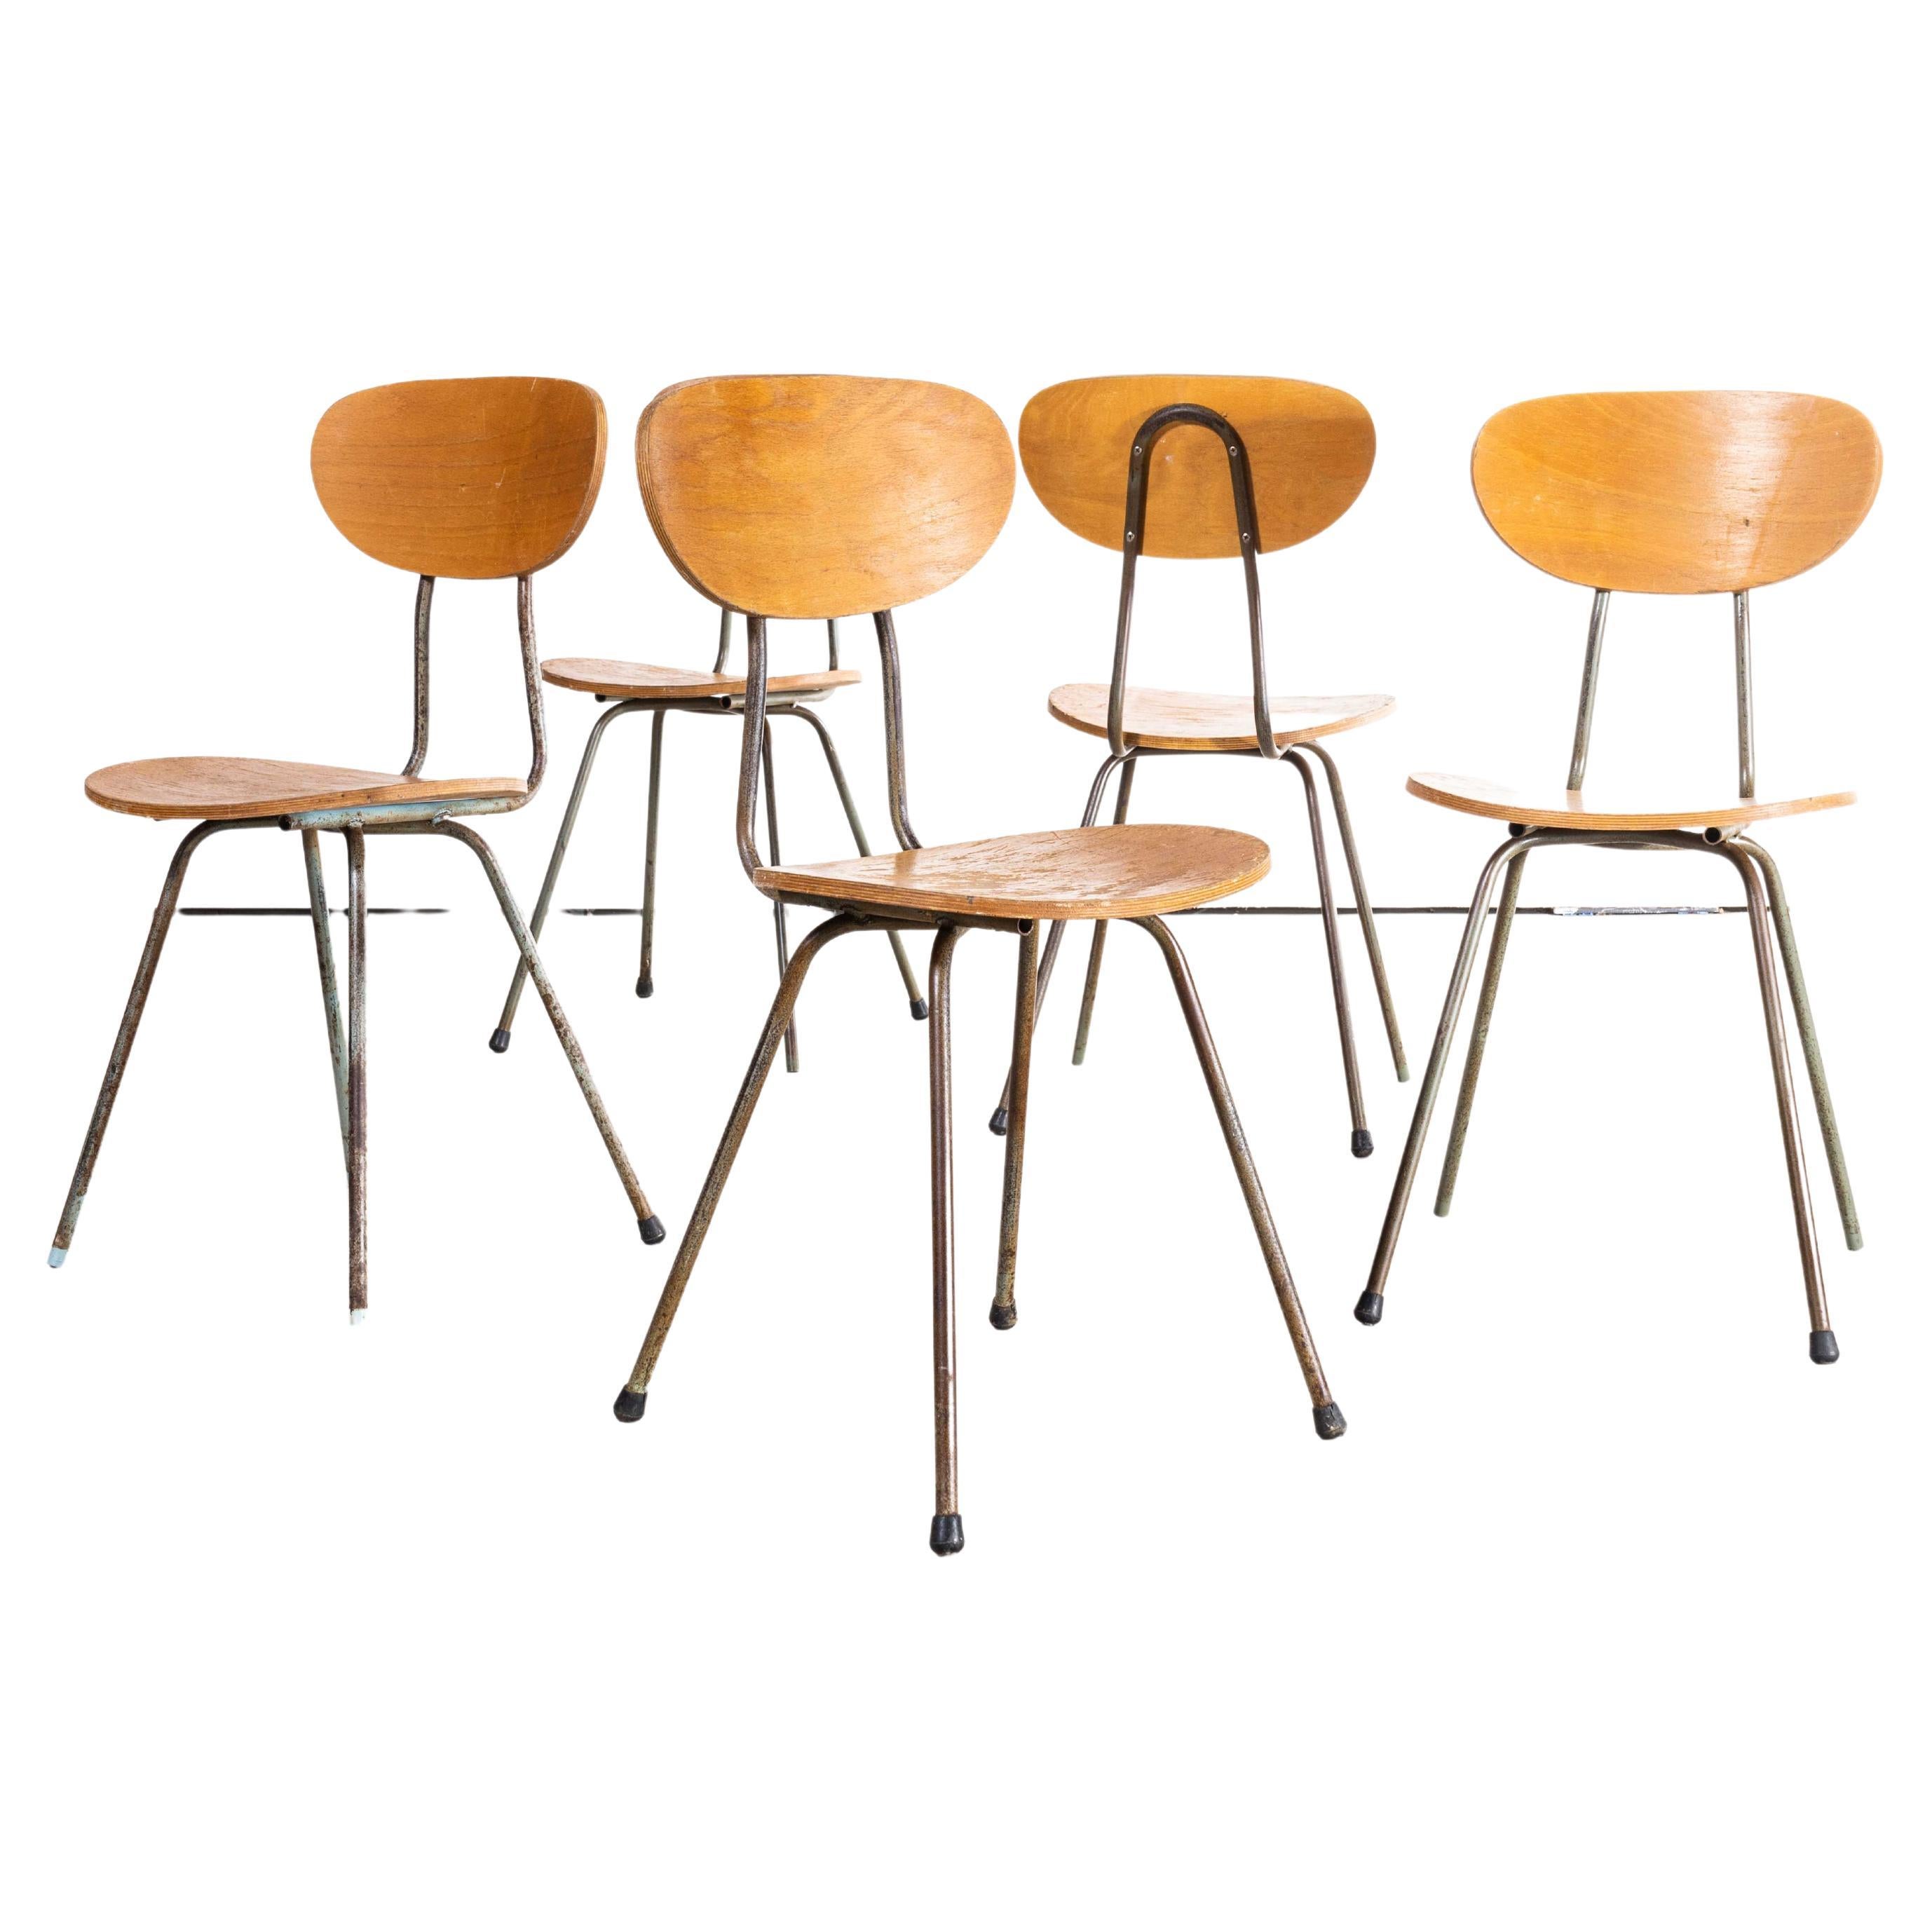 1960s German Café Dining Chairs Brown Frame, Set of Five For Sale